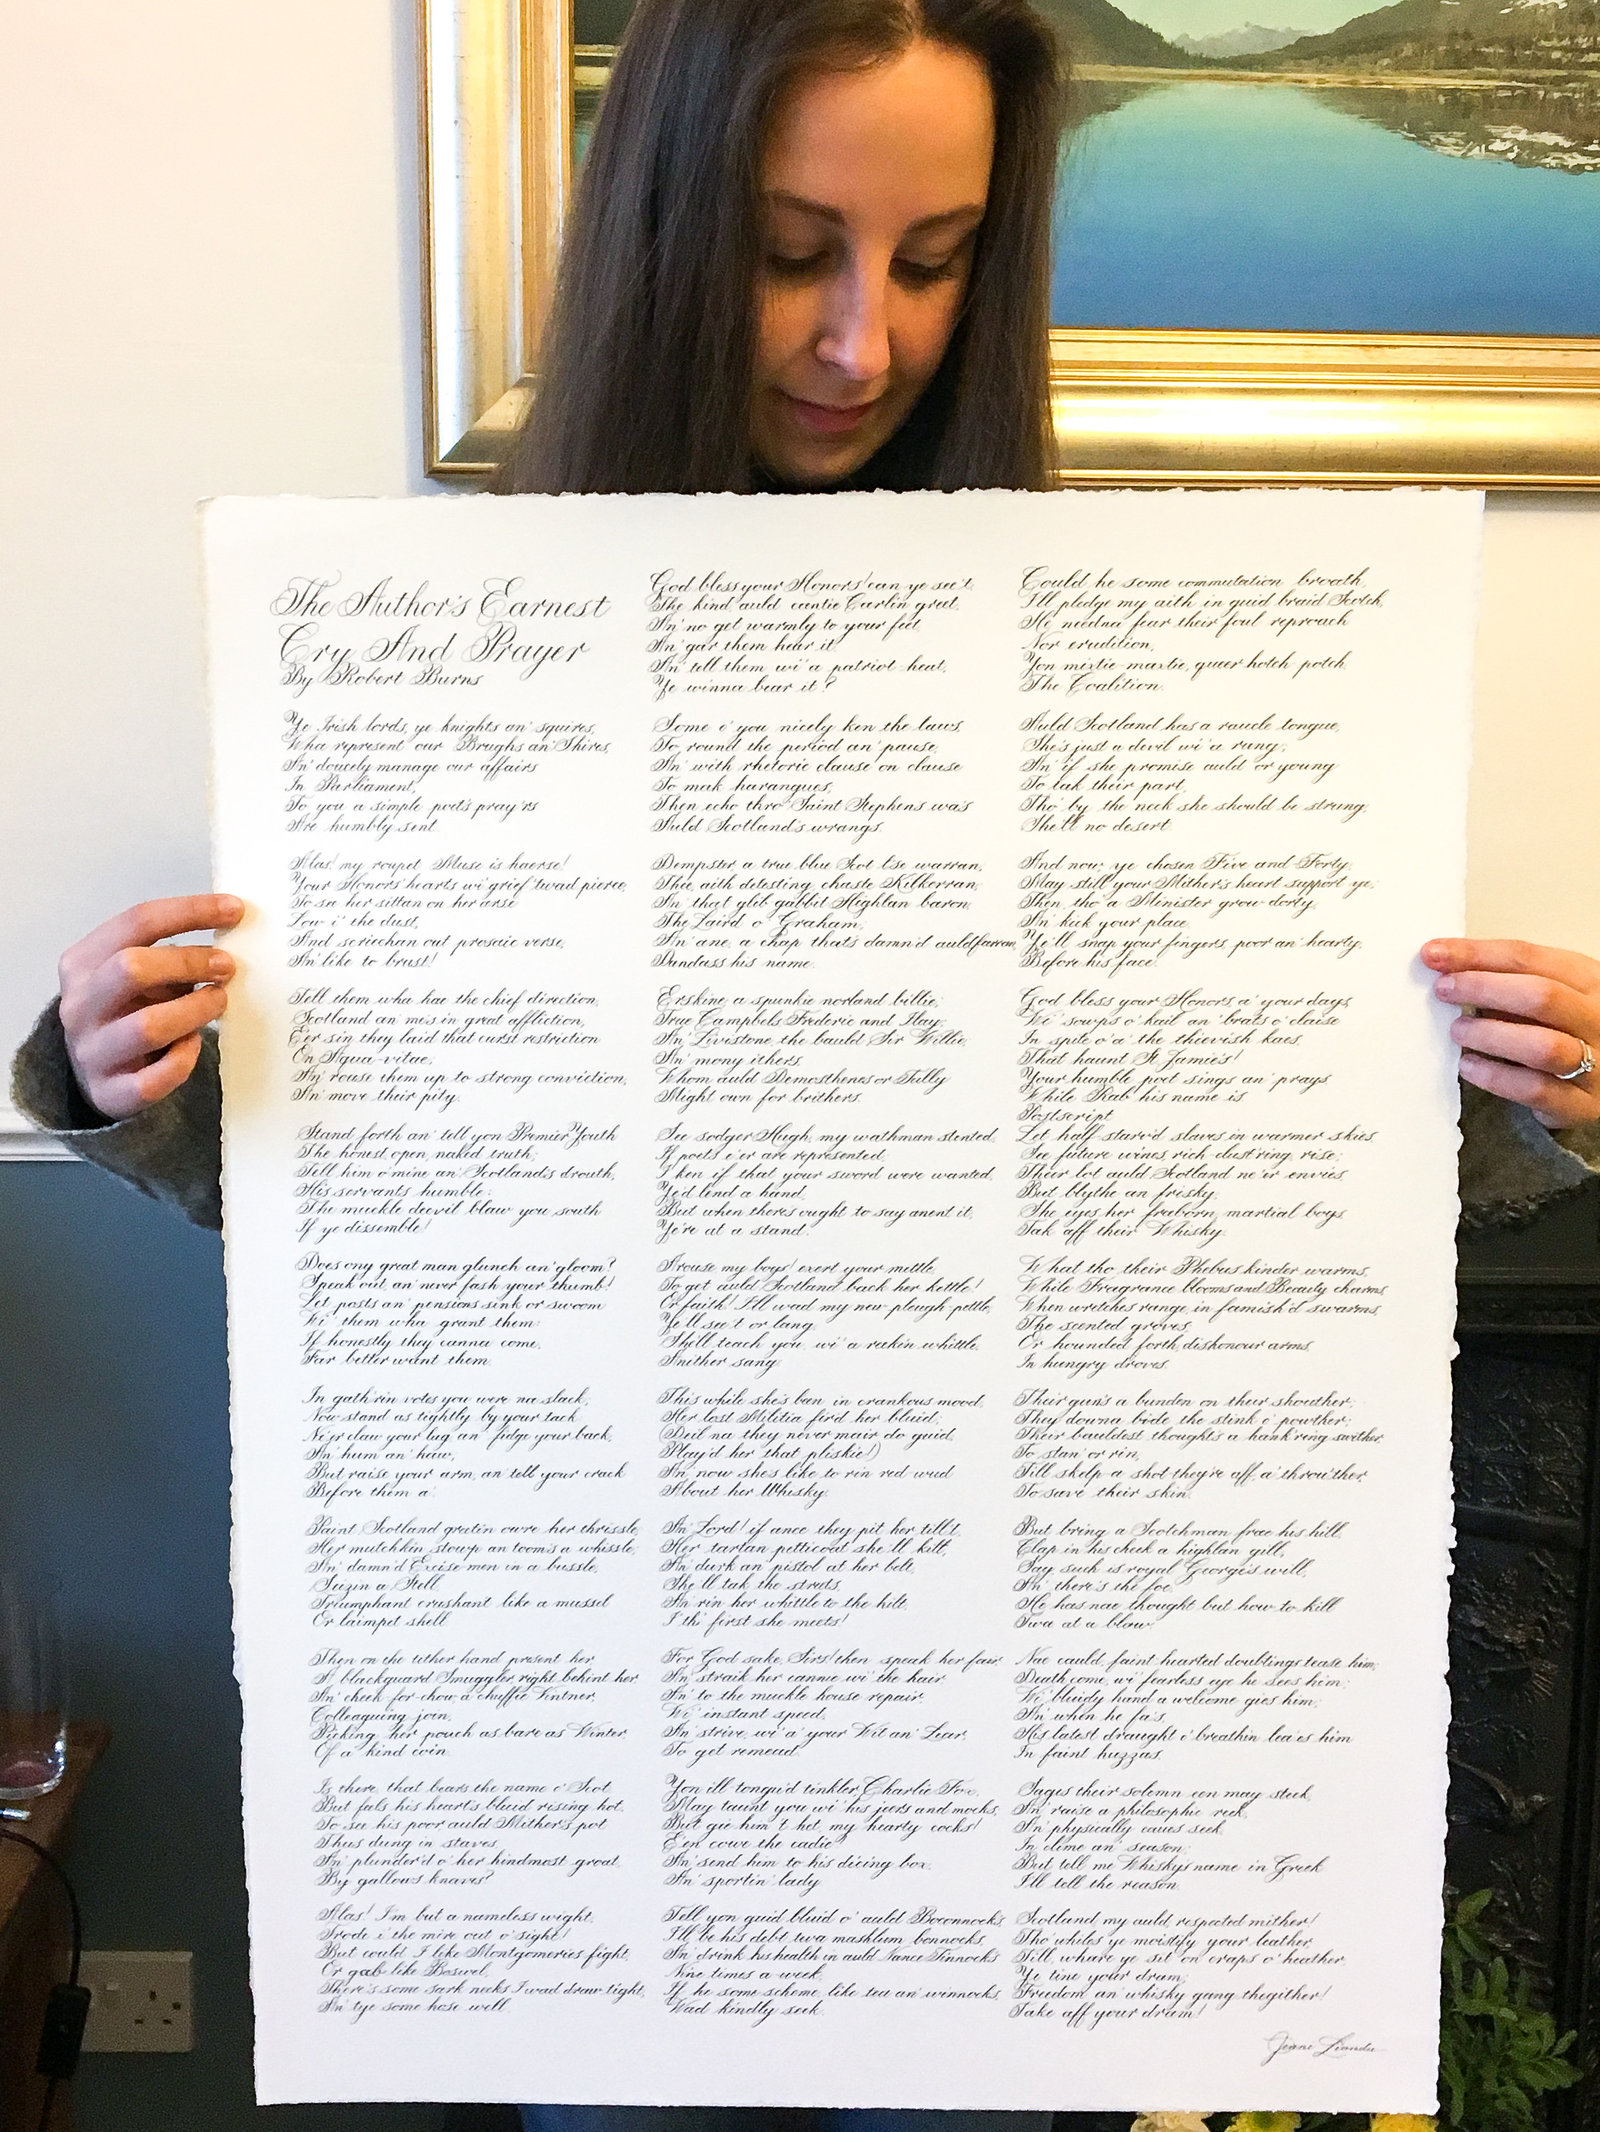 Large poem written in Copperplate calligraphy